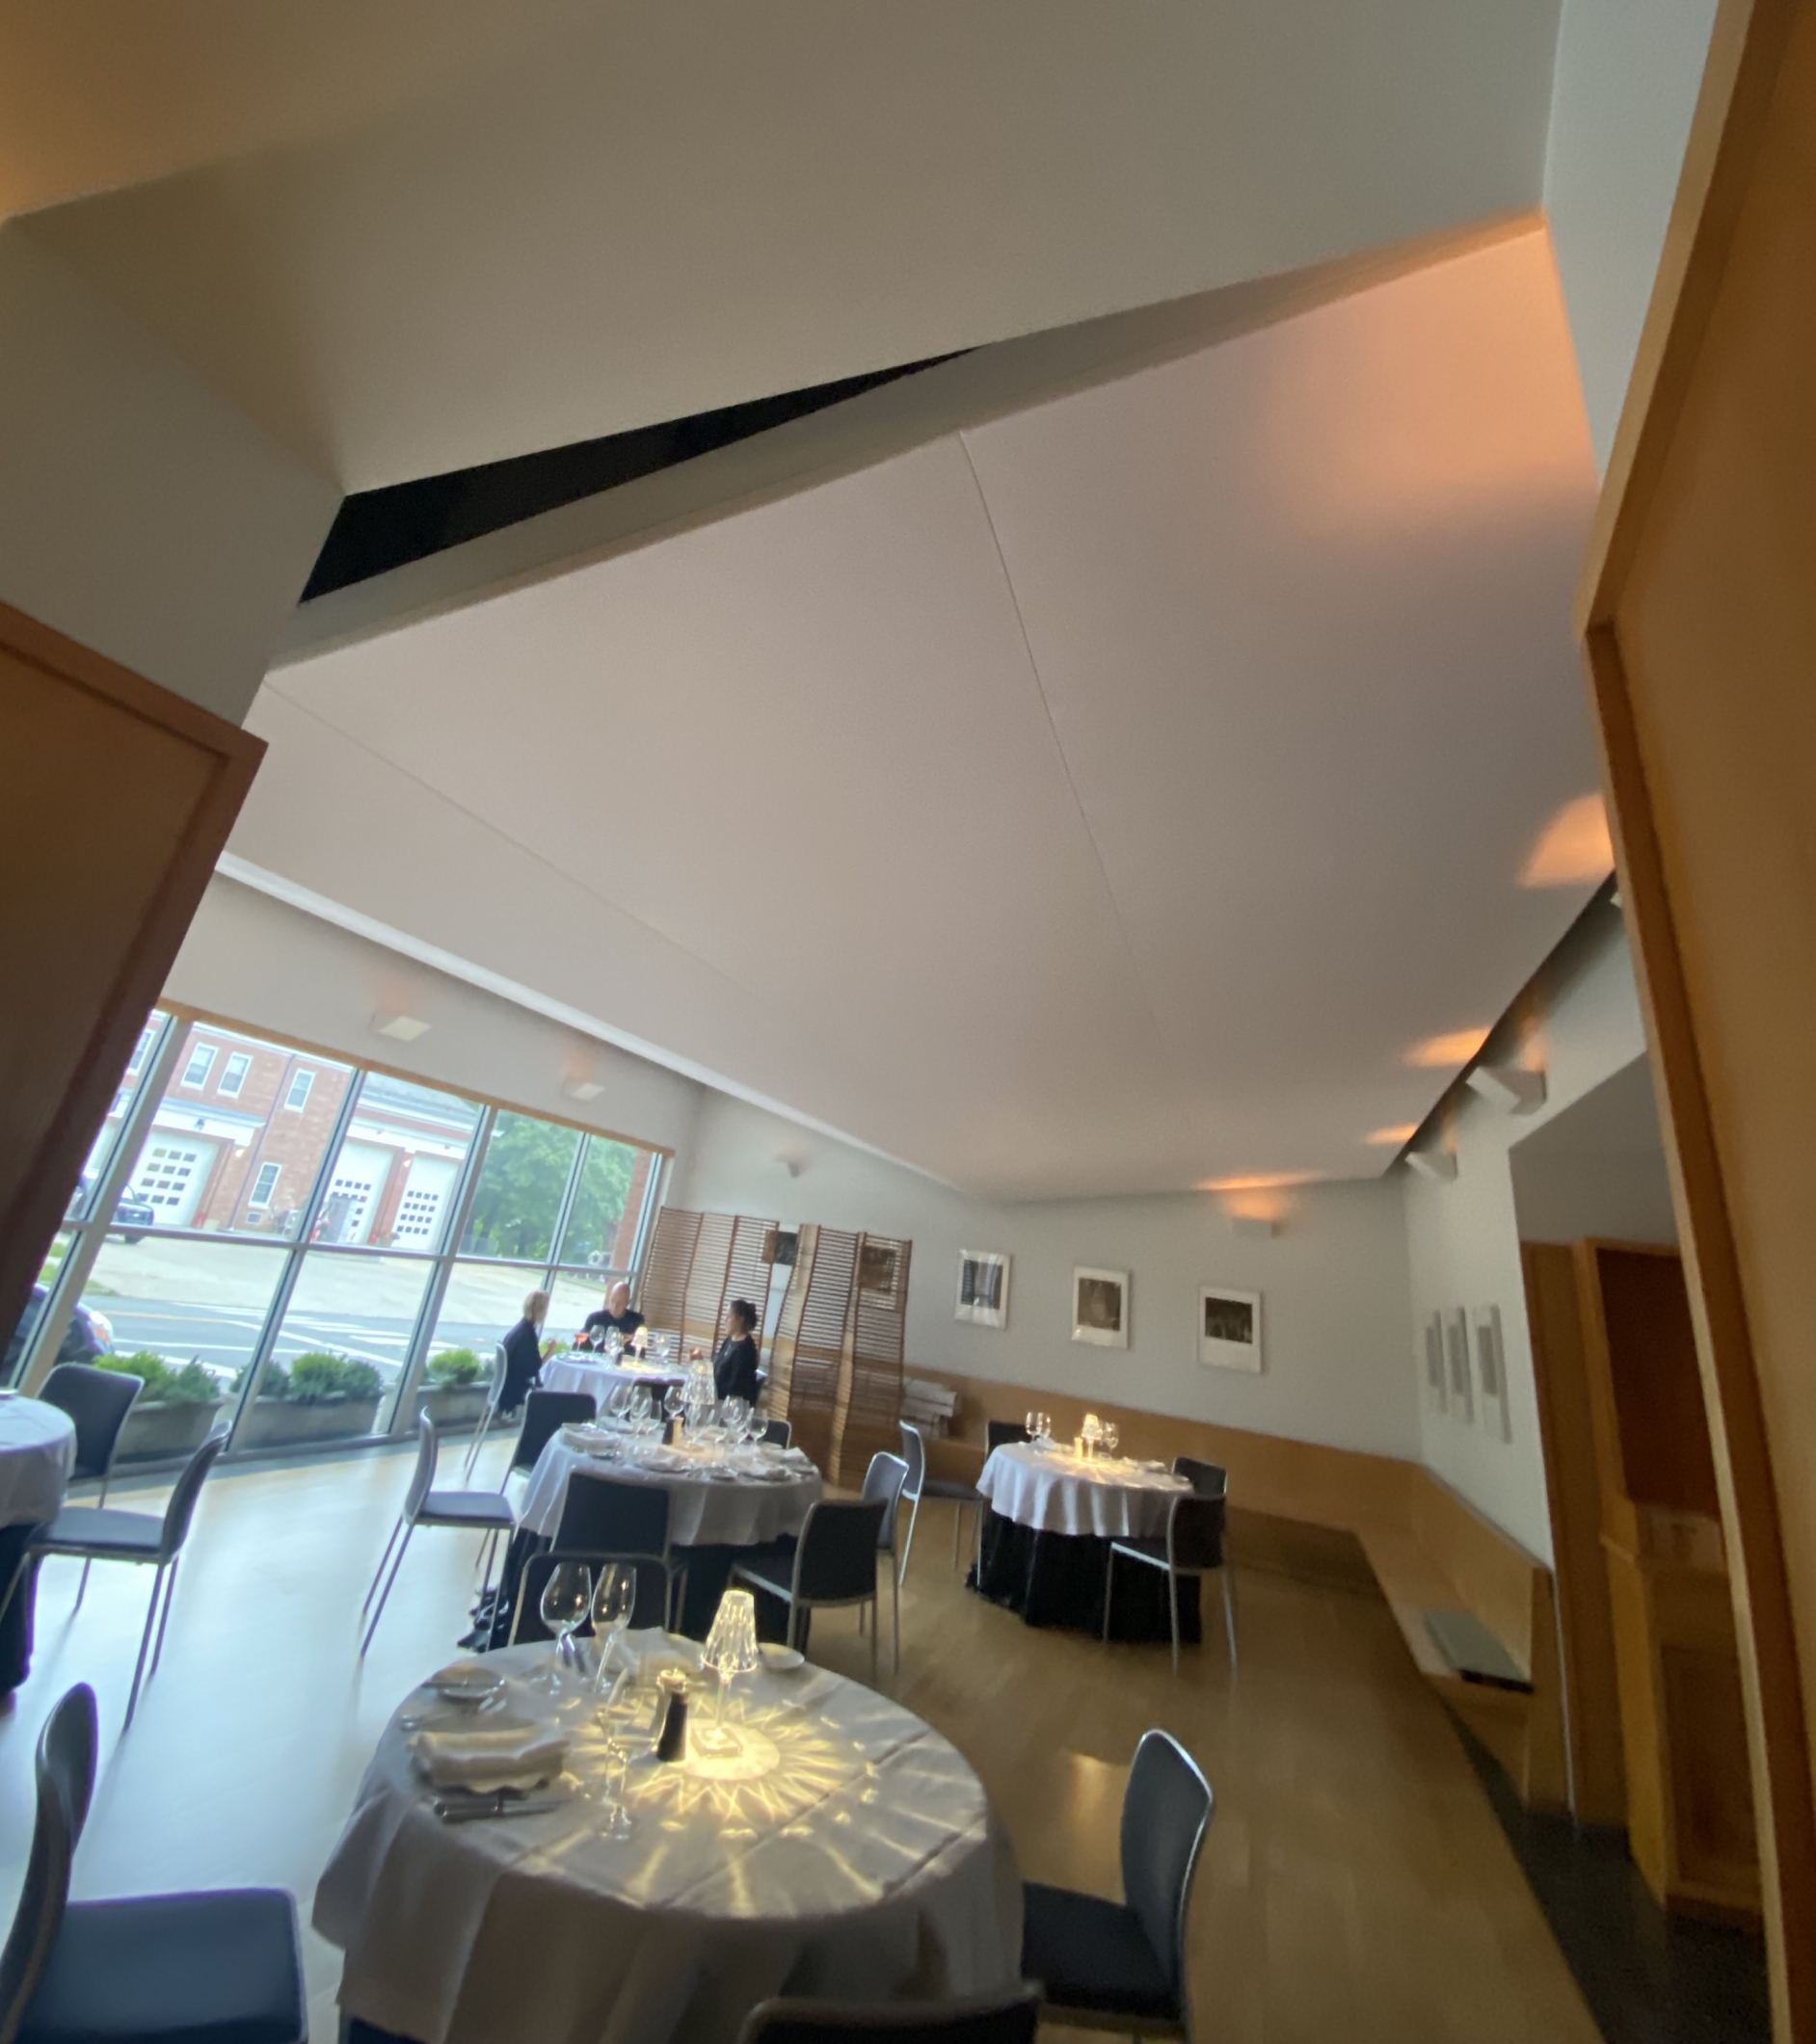 V-Shaped Fabric Ceiling in Restaurant